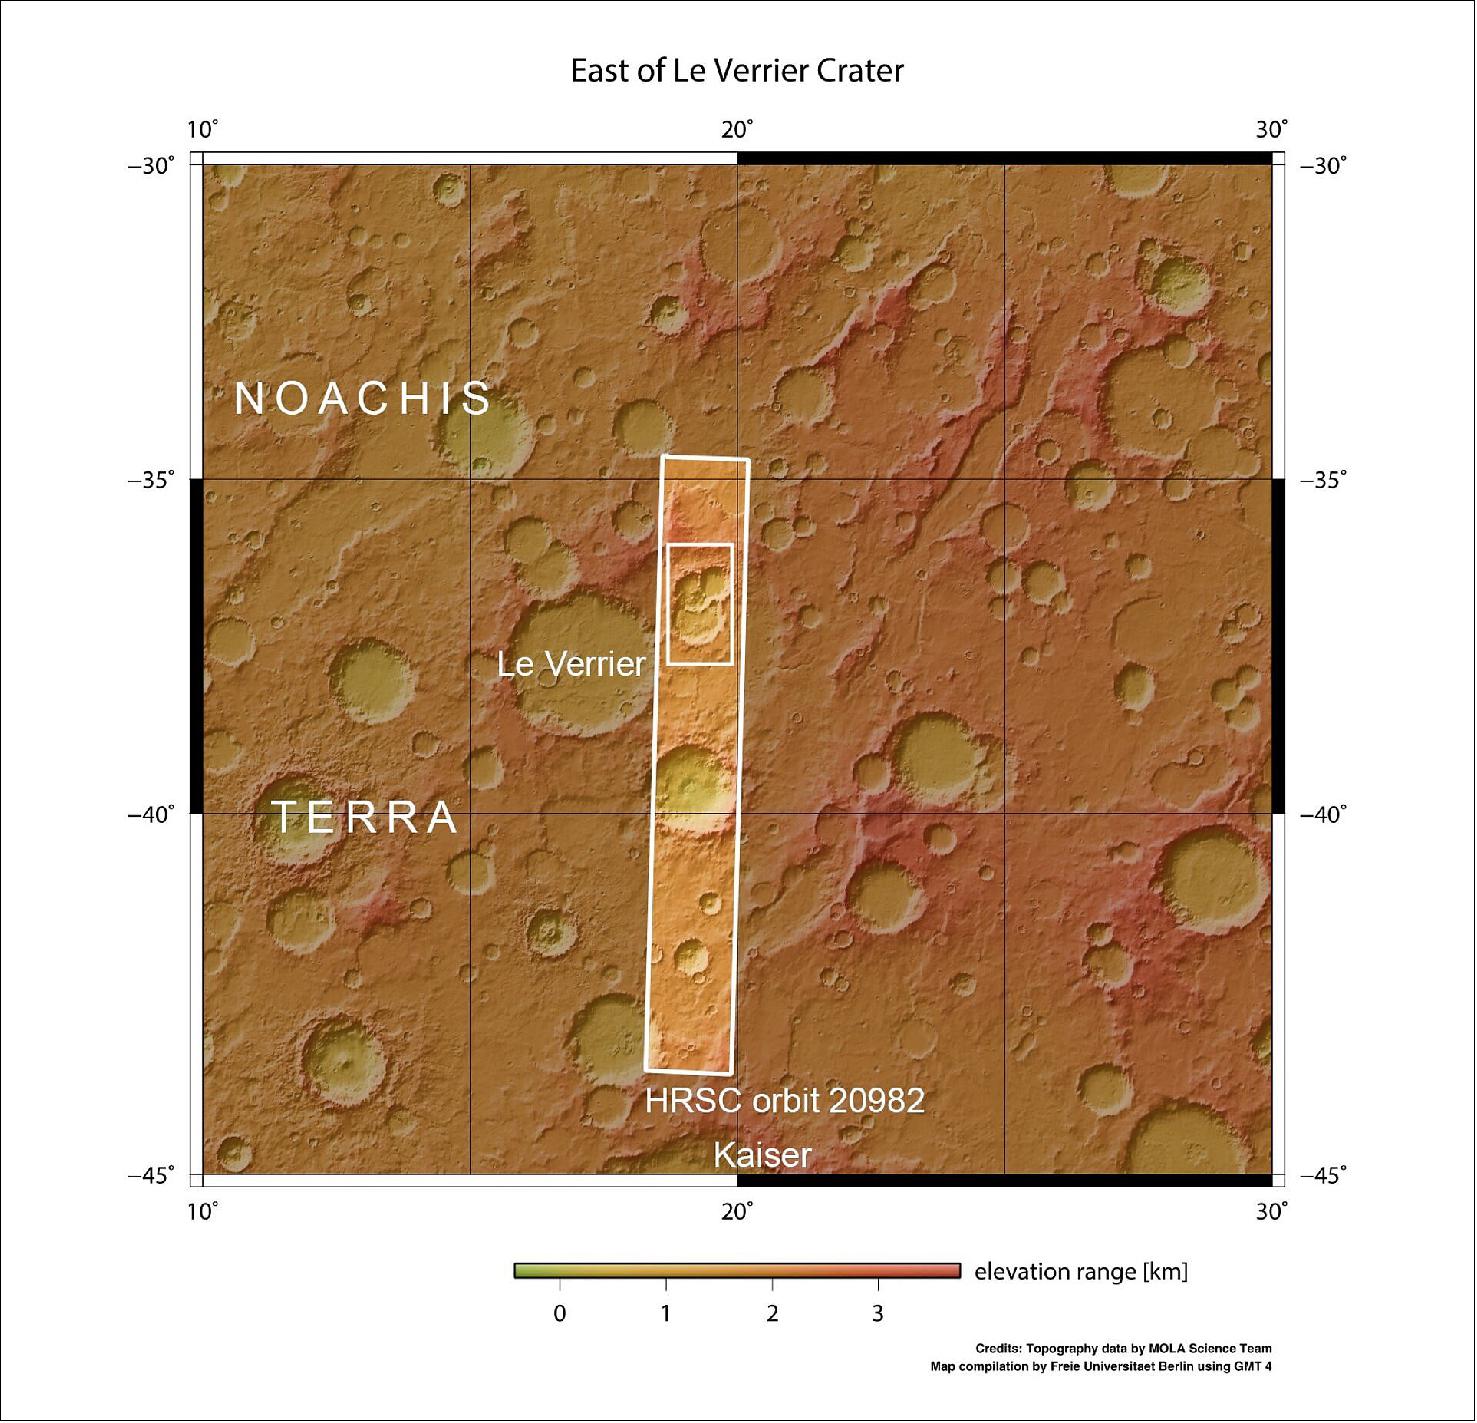 Figure 70: In context: Triple crater east of Le Verrier. This image shows a triple crater in the ancient martian highlands – more specifically, the region of Noachis Terra – in a wider context. The area outlined by the bold white box indicates the area imaged by the Mars Express High Resolution Stereo Camera (HRSC) on 6 August 2020 during orbit 20982 (image credit: NASA MGS MOLA Science Team)